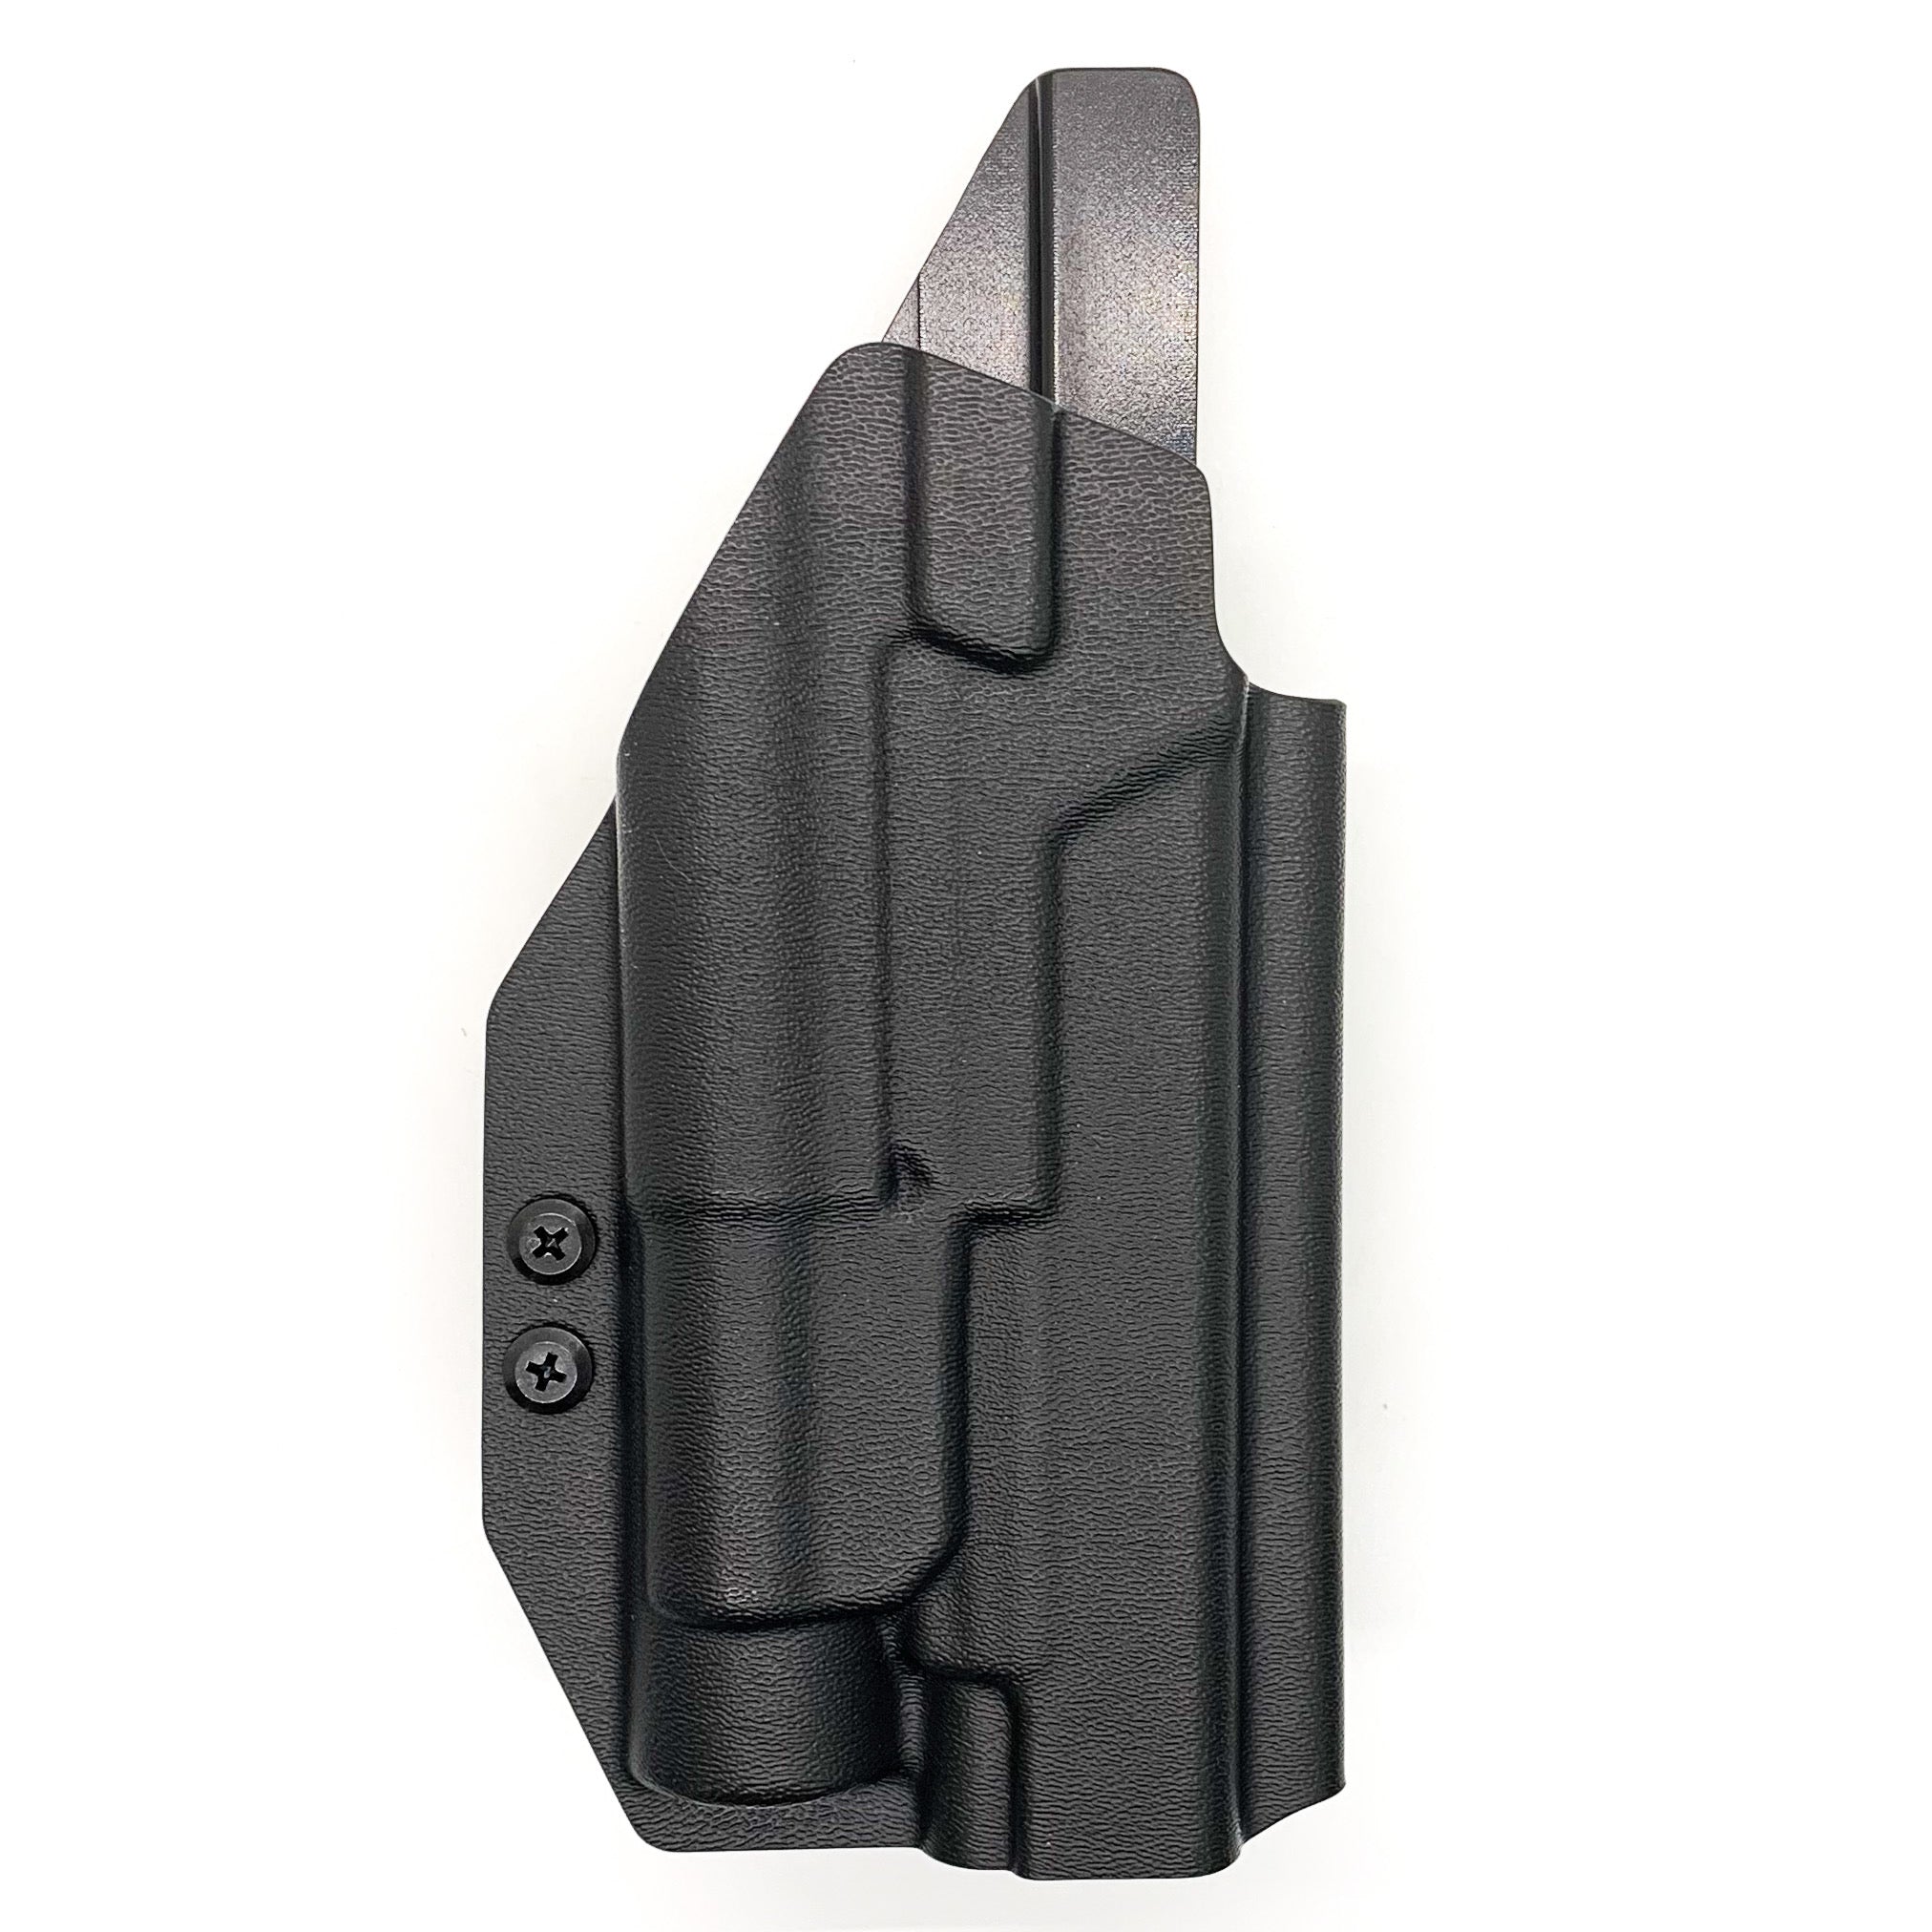 For the best Outside Waistband Taco Style Kydex Holster designed to fit the Glock 17, 34, and 47 Gen 5 pistols with the Streamlight TLR-1 HL, shop Four Brothers Holsters. Gen 4 Glock 17 and 22 and TLR1 HL. Full sweat guard, adjustable retention. Made in USA Open muzzle for threaded barrels, cleared for red dot sights